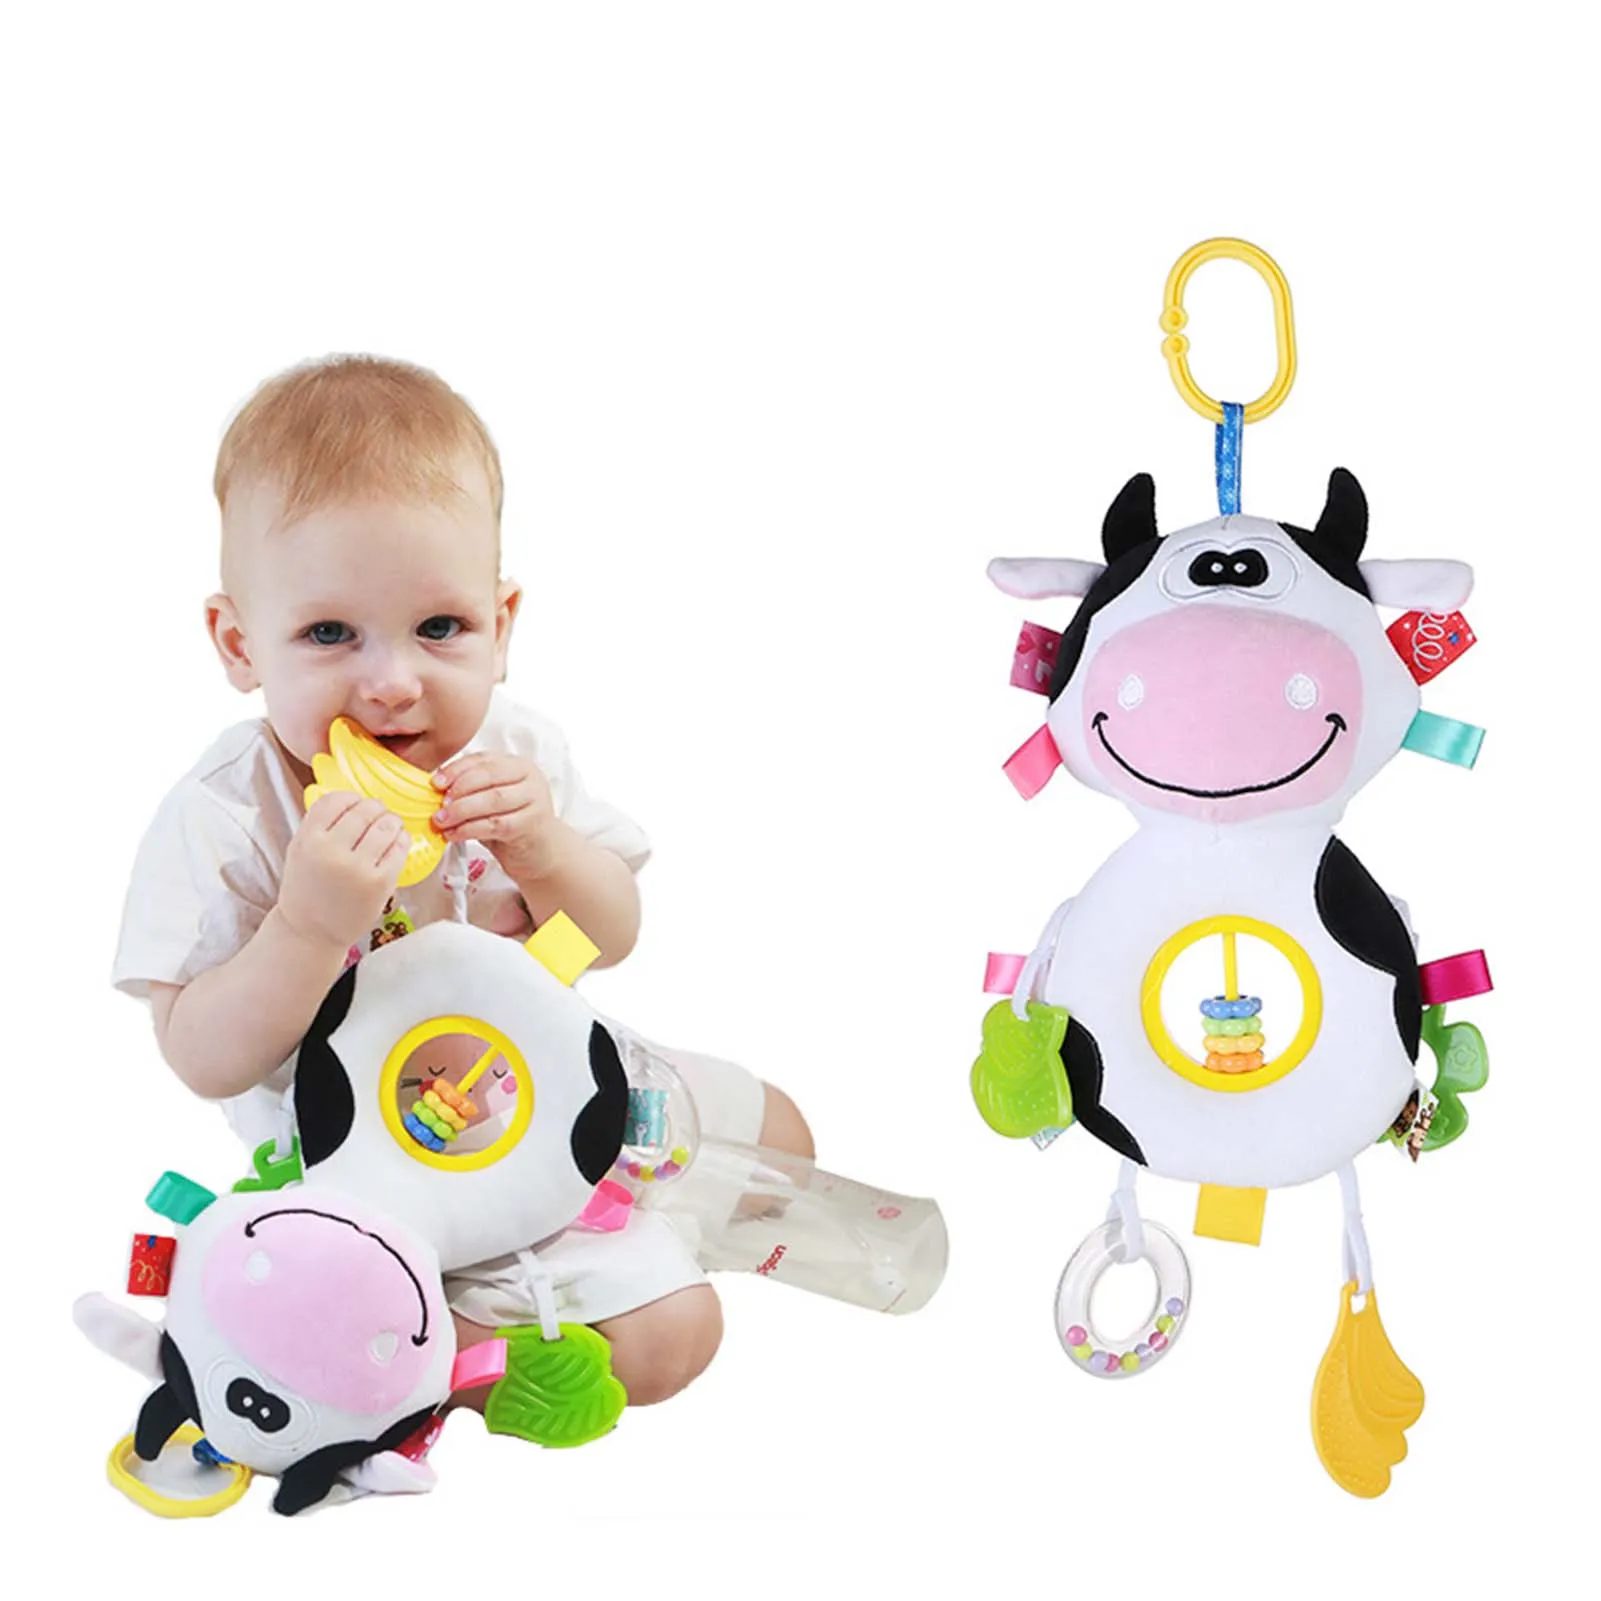 

Kid Rattles Sound Toys Stroller Toys Baby Teether Plush Cow Activity Toy Set Stuffed Animal Plush Baby Newborn Rattle Toy With